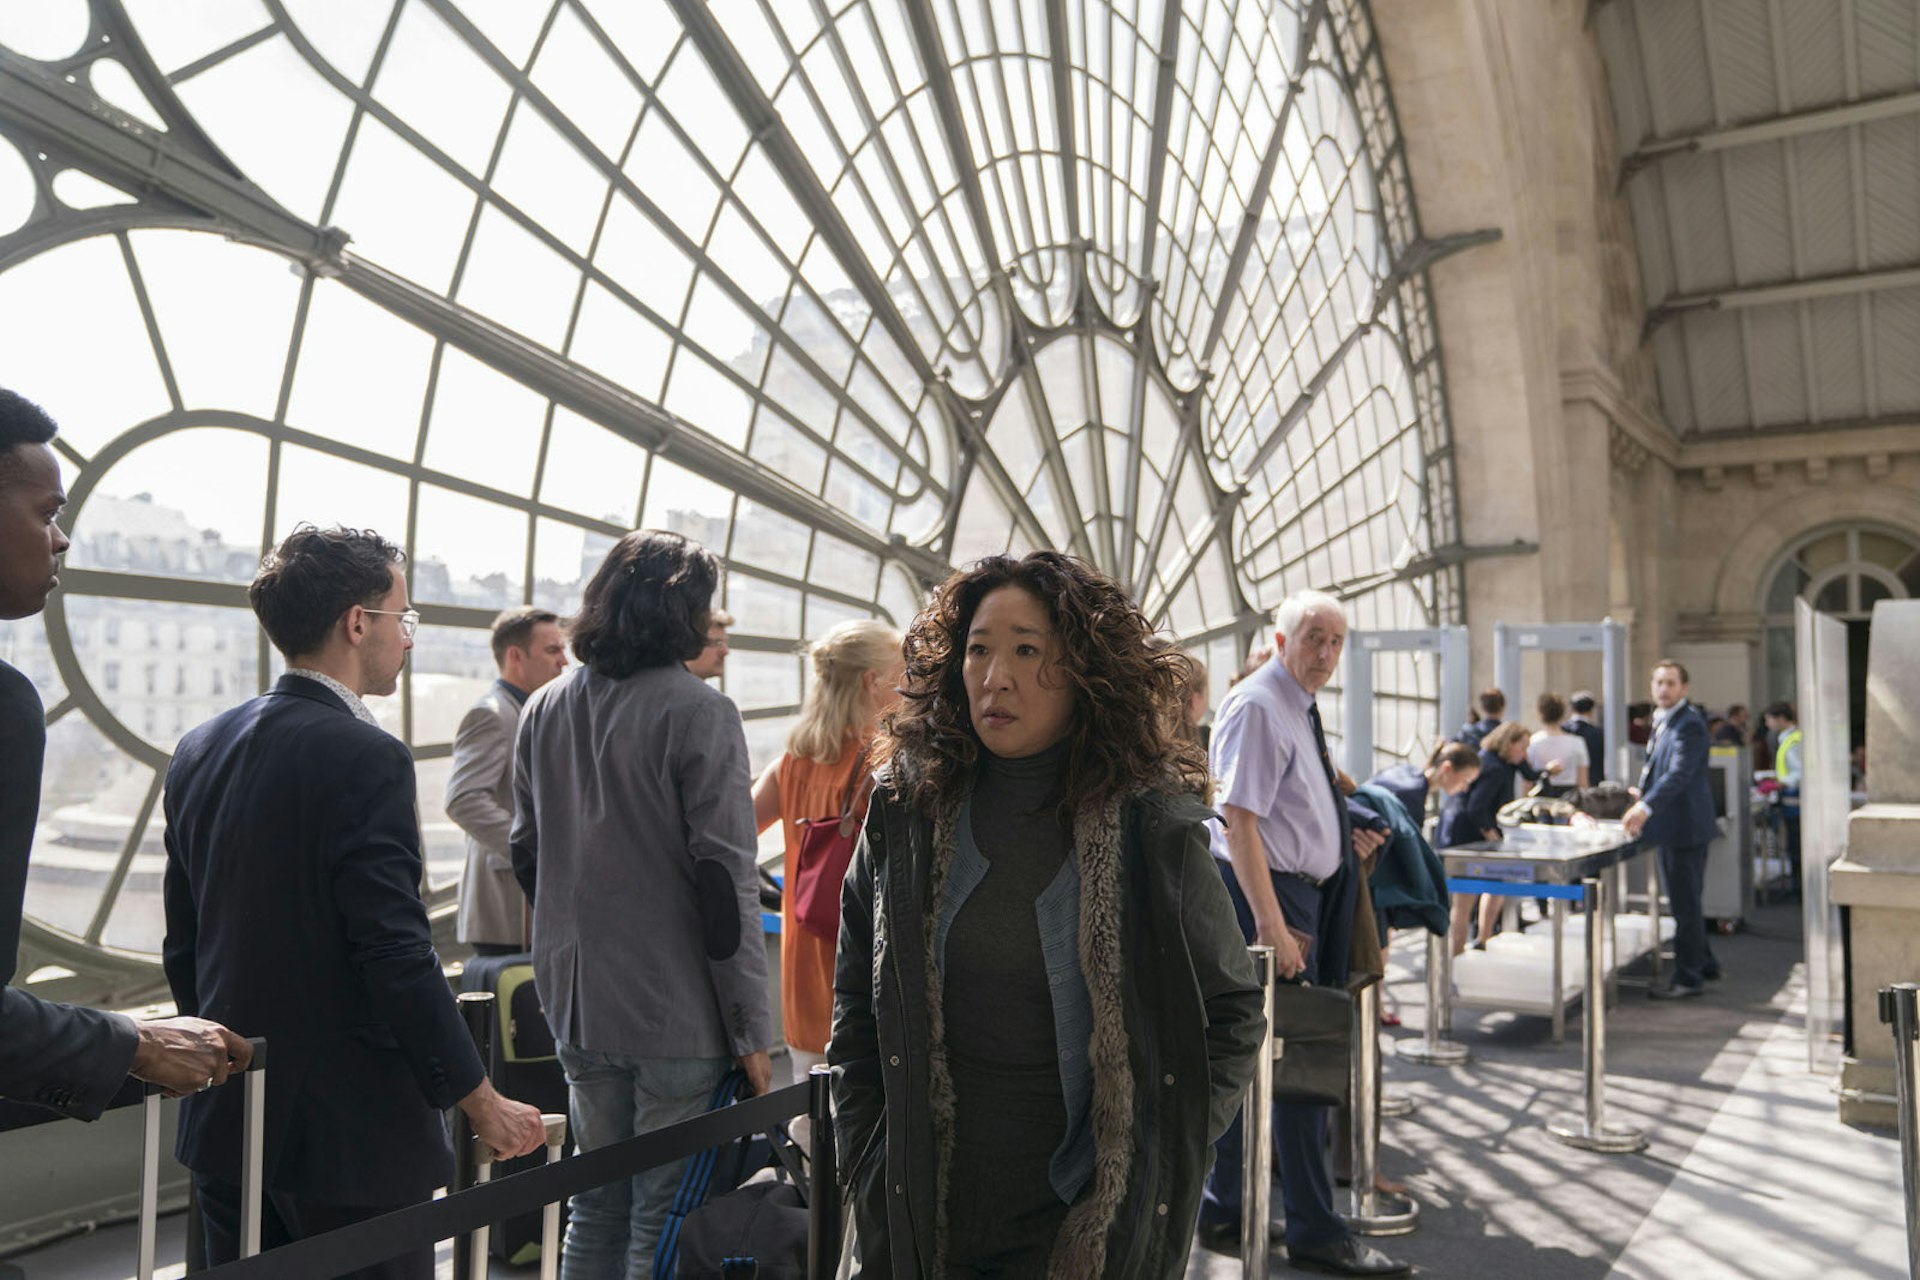 Eve (played by Sandra Oh) looks worried in Paris's Gare du Nord, with a huge window and a queue for the Eurostar security scanner behind her. This scene from Killing Eve season two was actually filmed at the nearby Gare de l'Est.